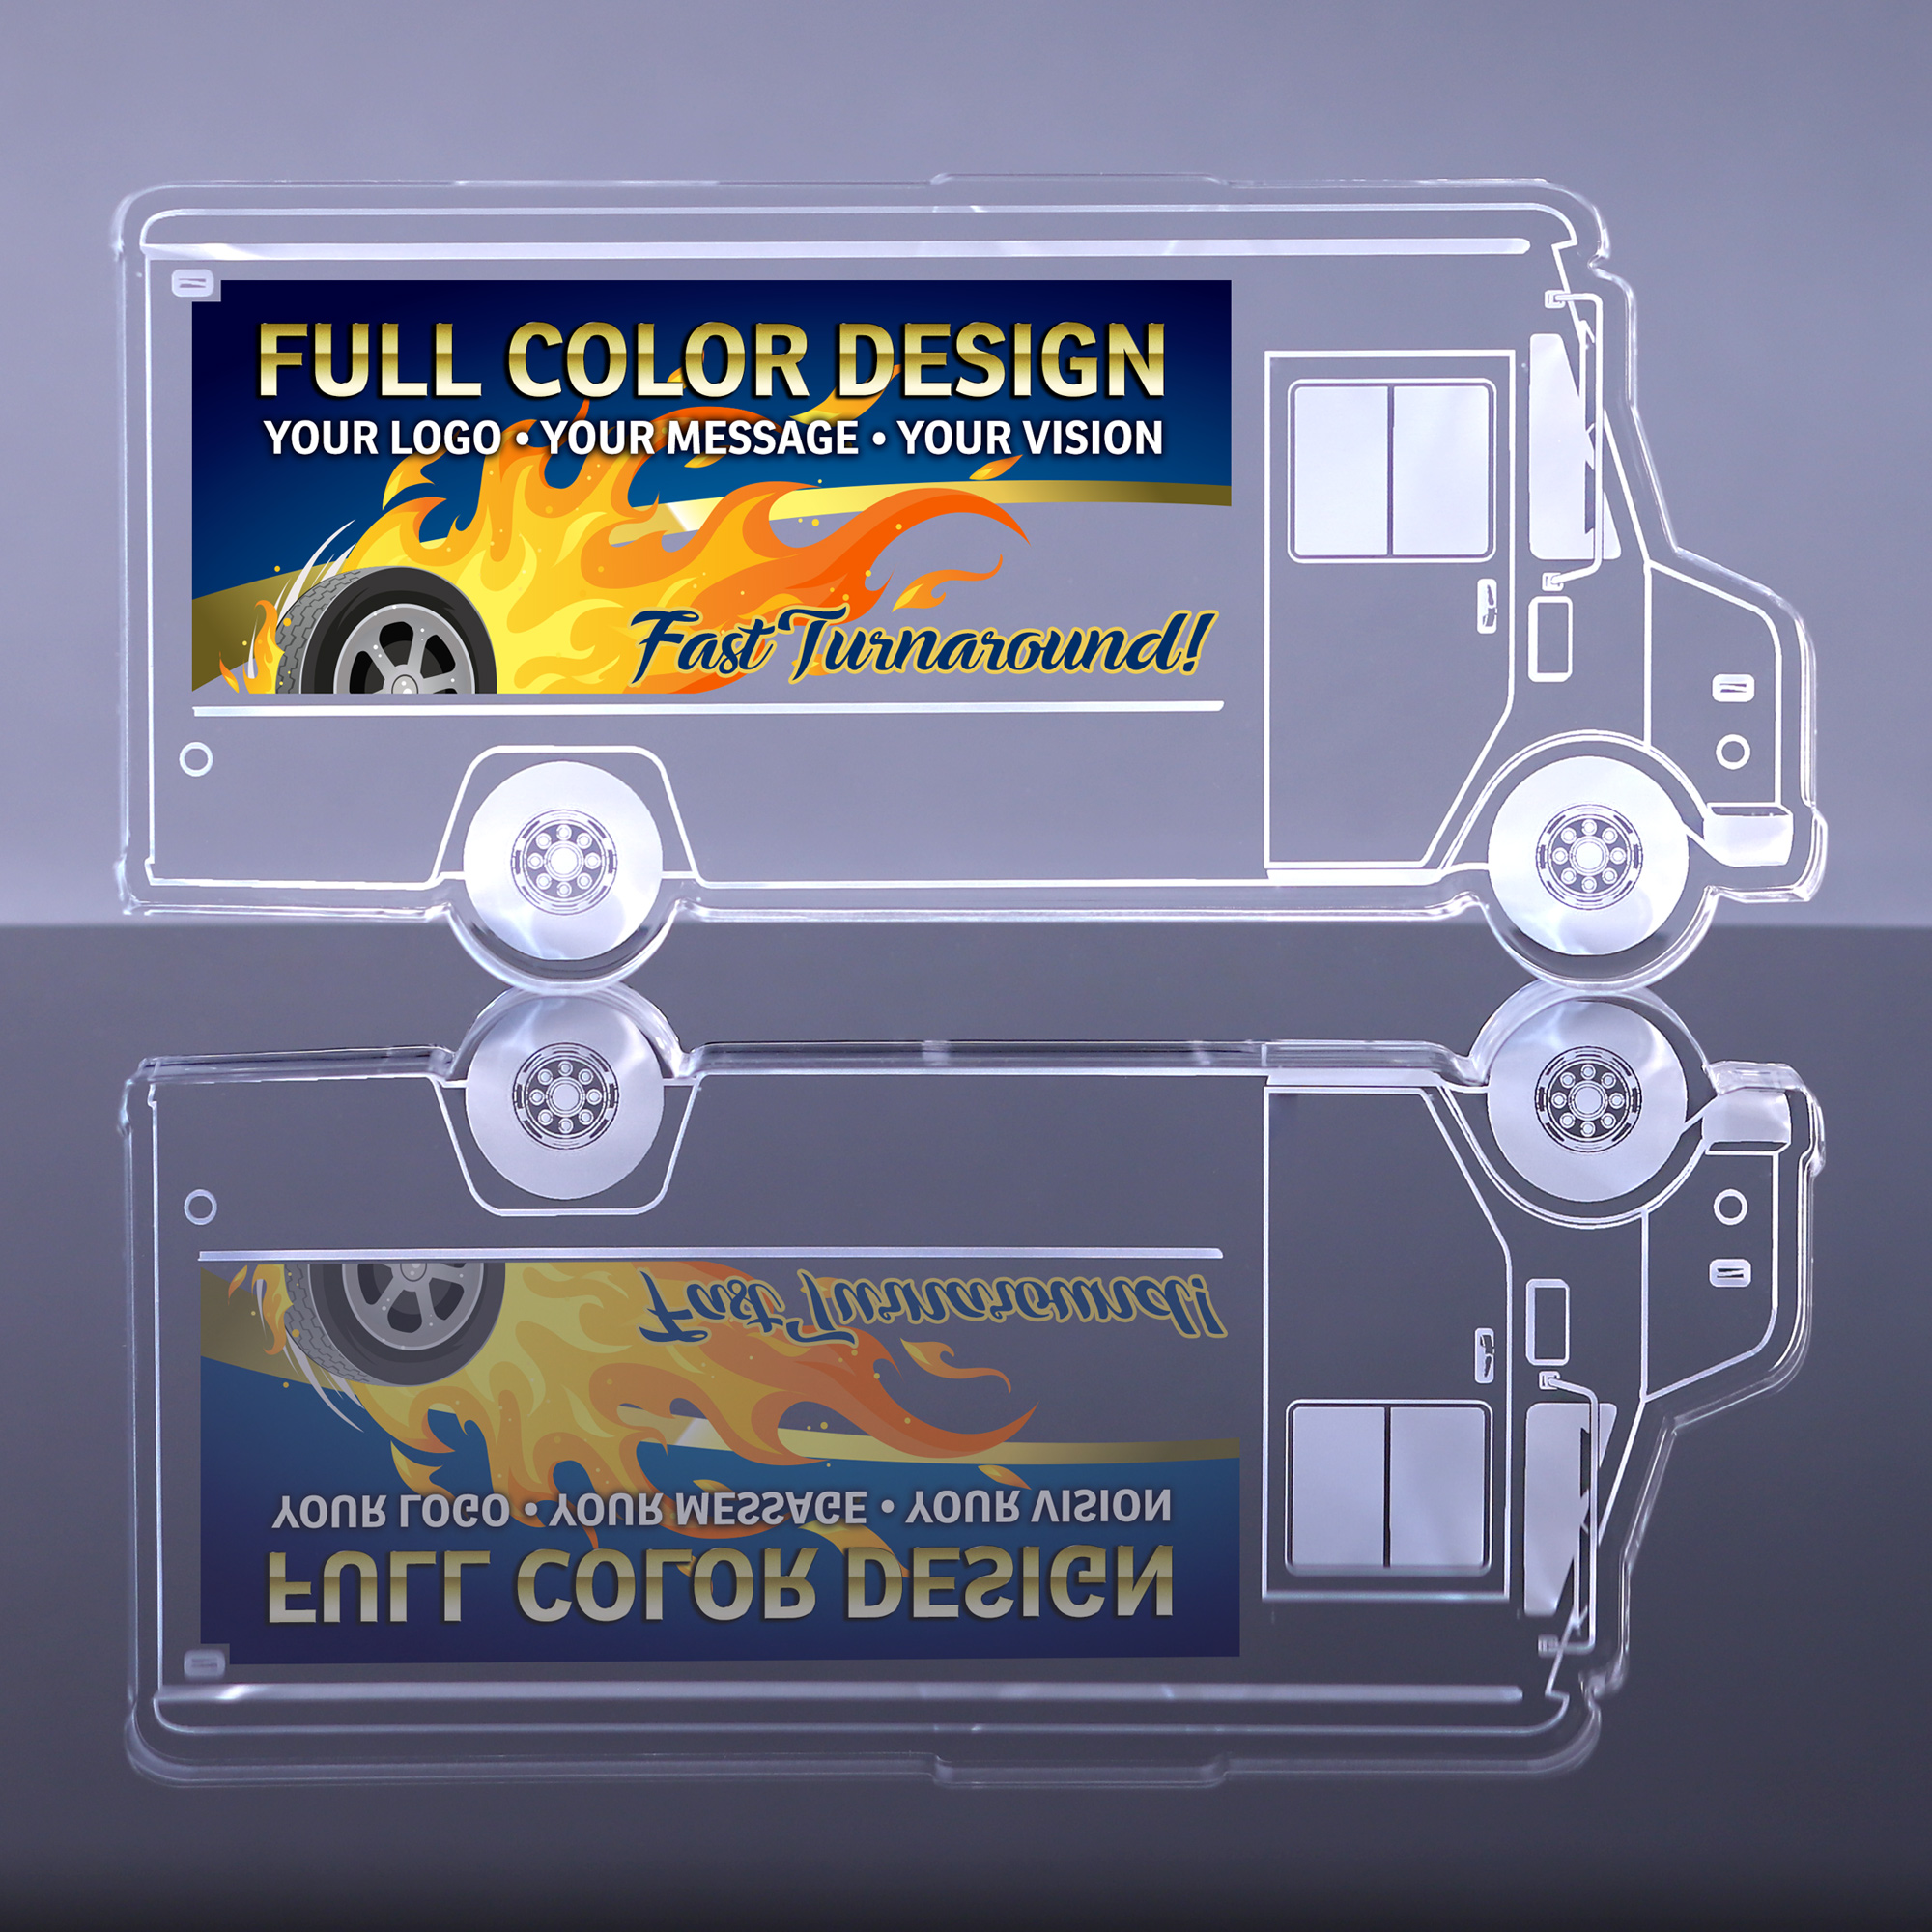 1 inch Thick Acrylic Delivery Truck Award - 6 inch Color